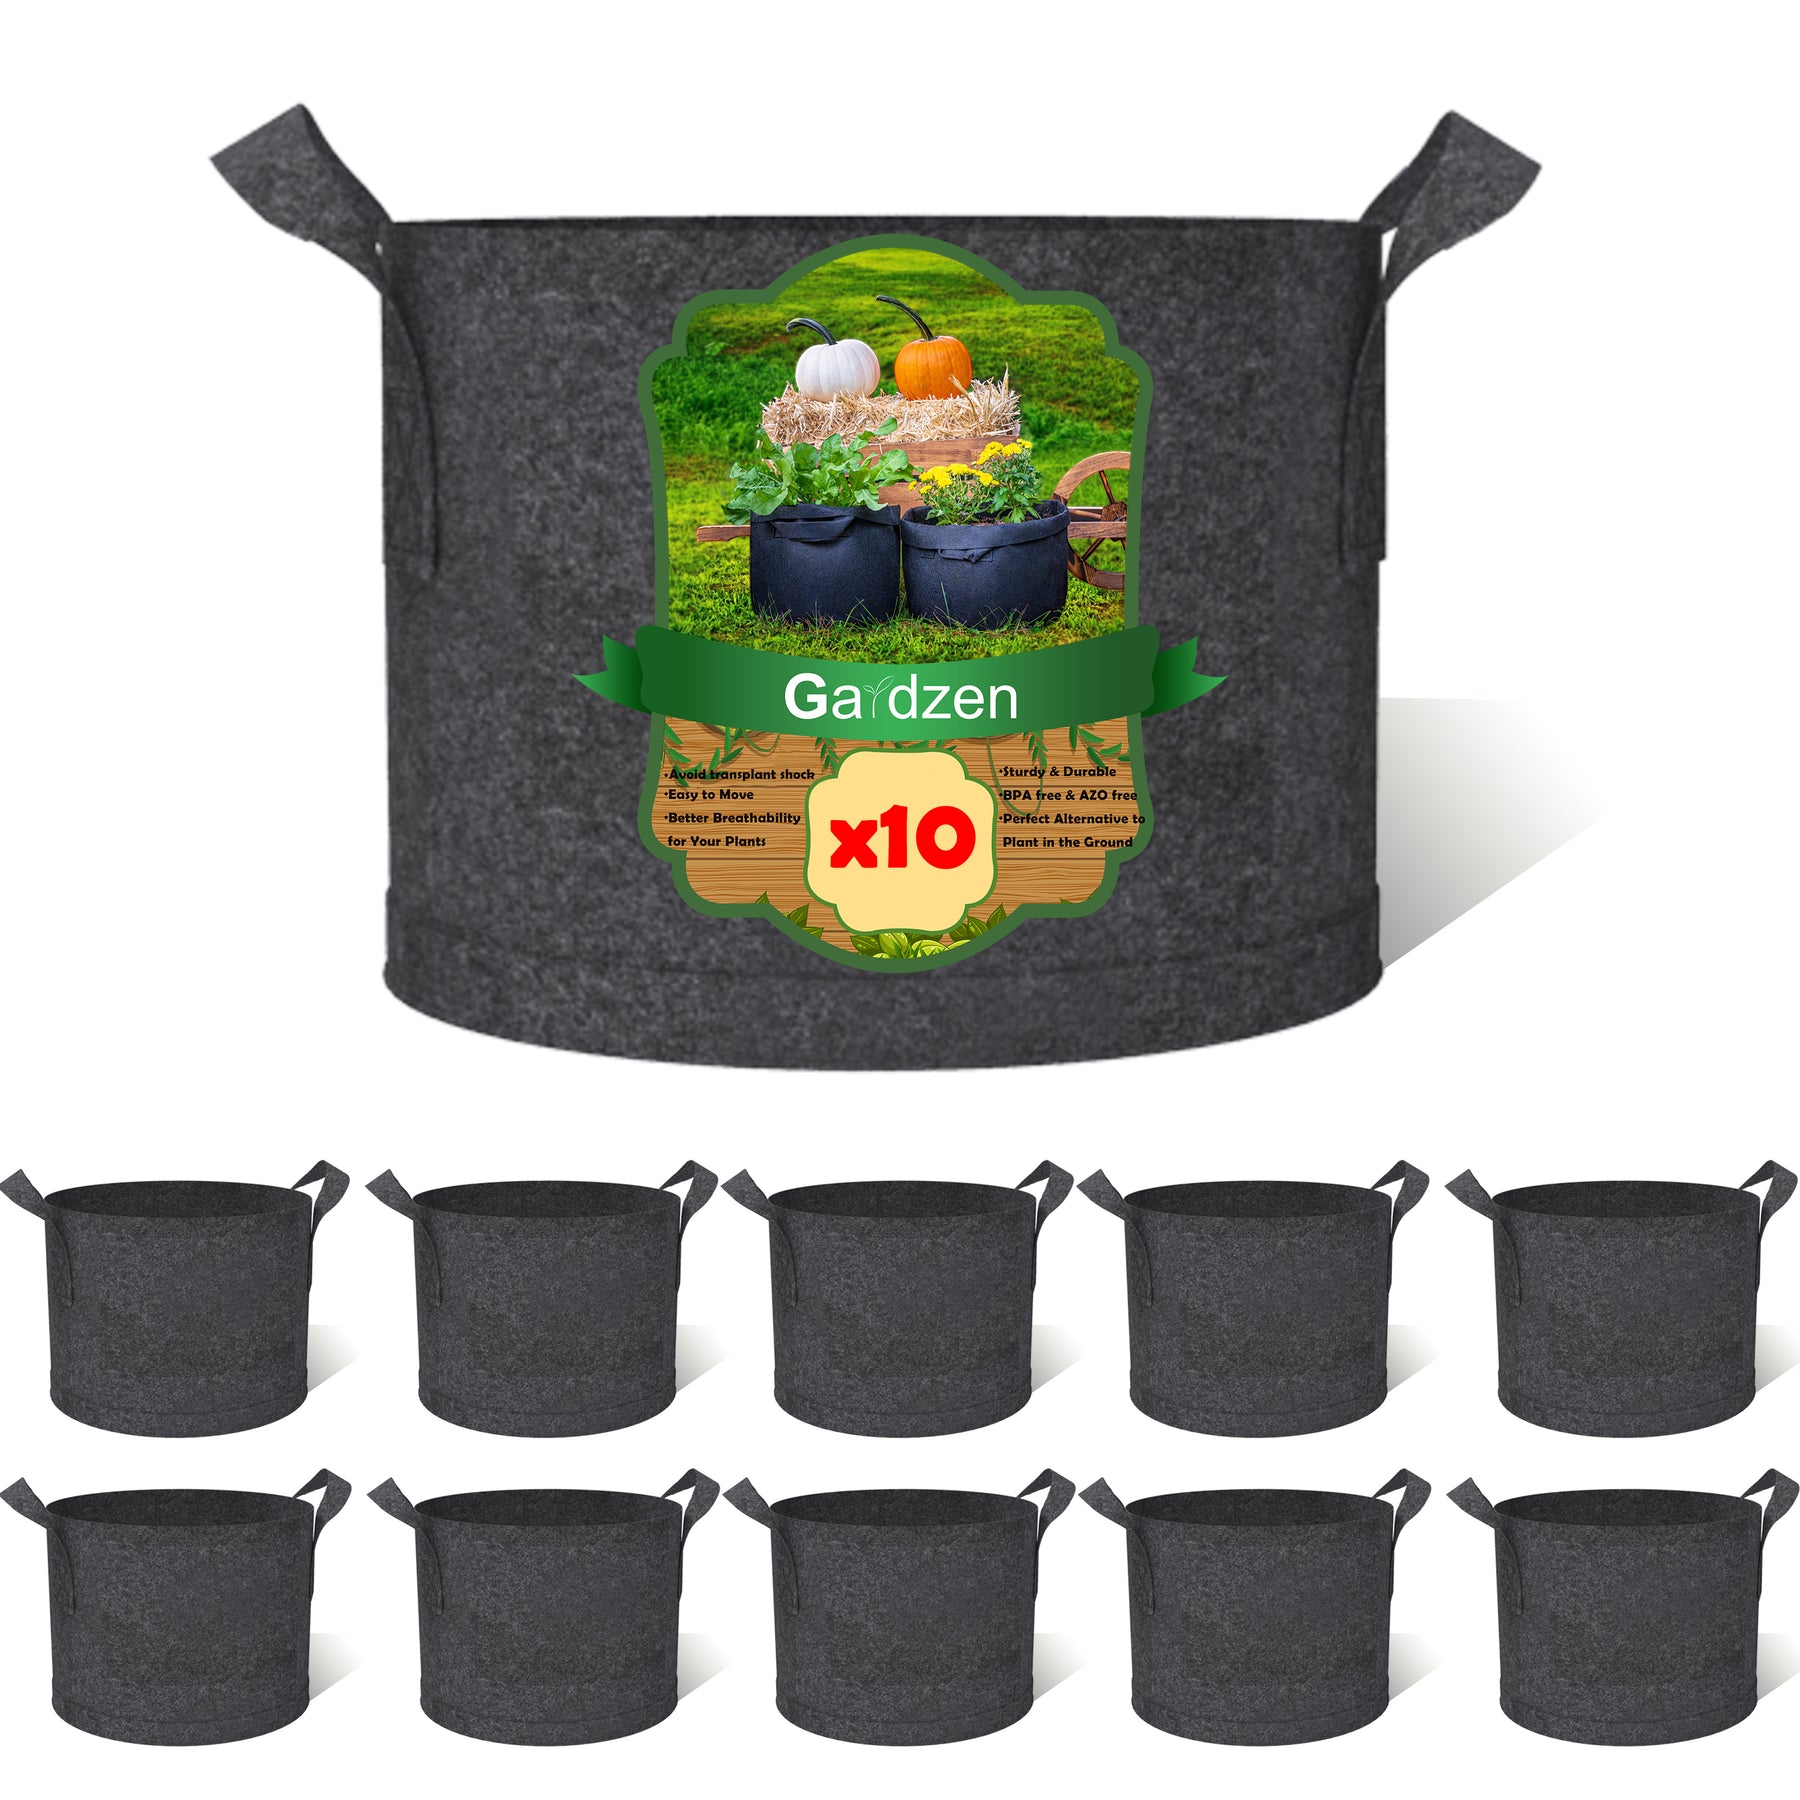 10 Gallon (about 35.7 Liters) Garden Potato Grow Bag With Opening